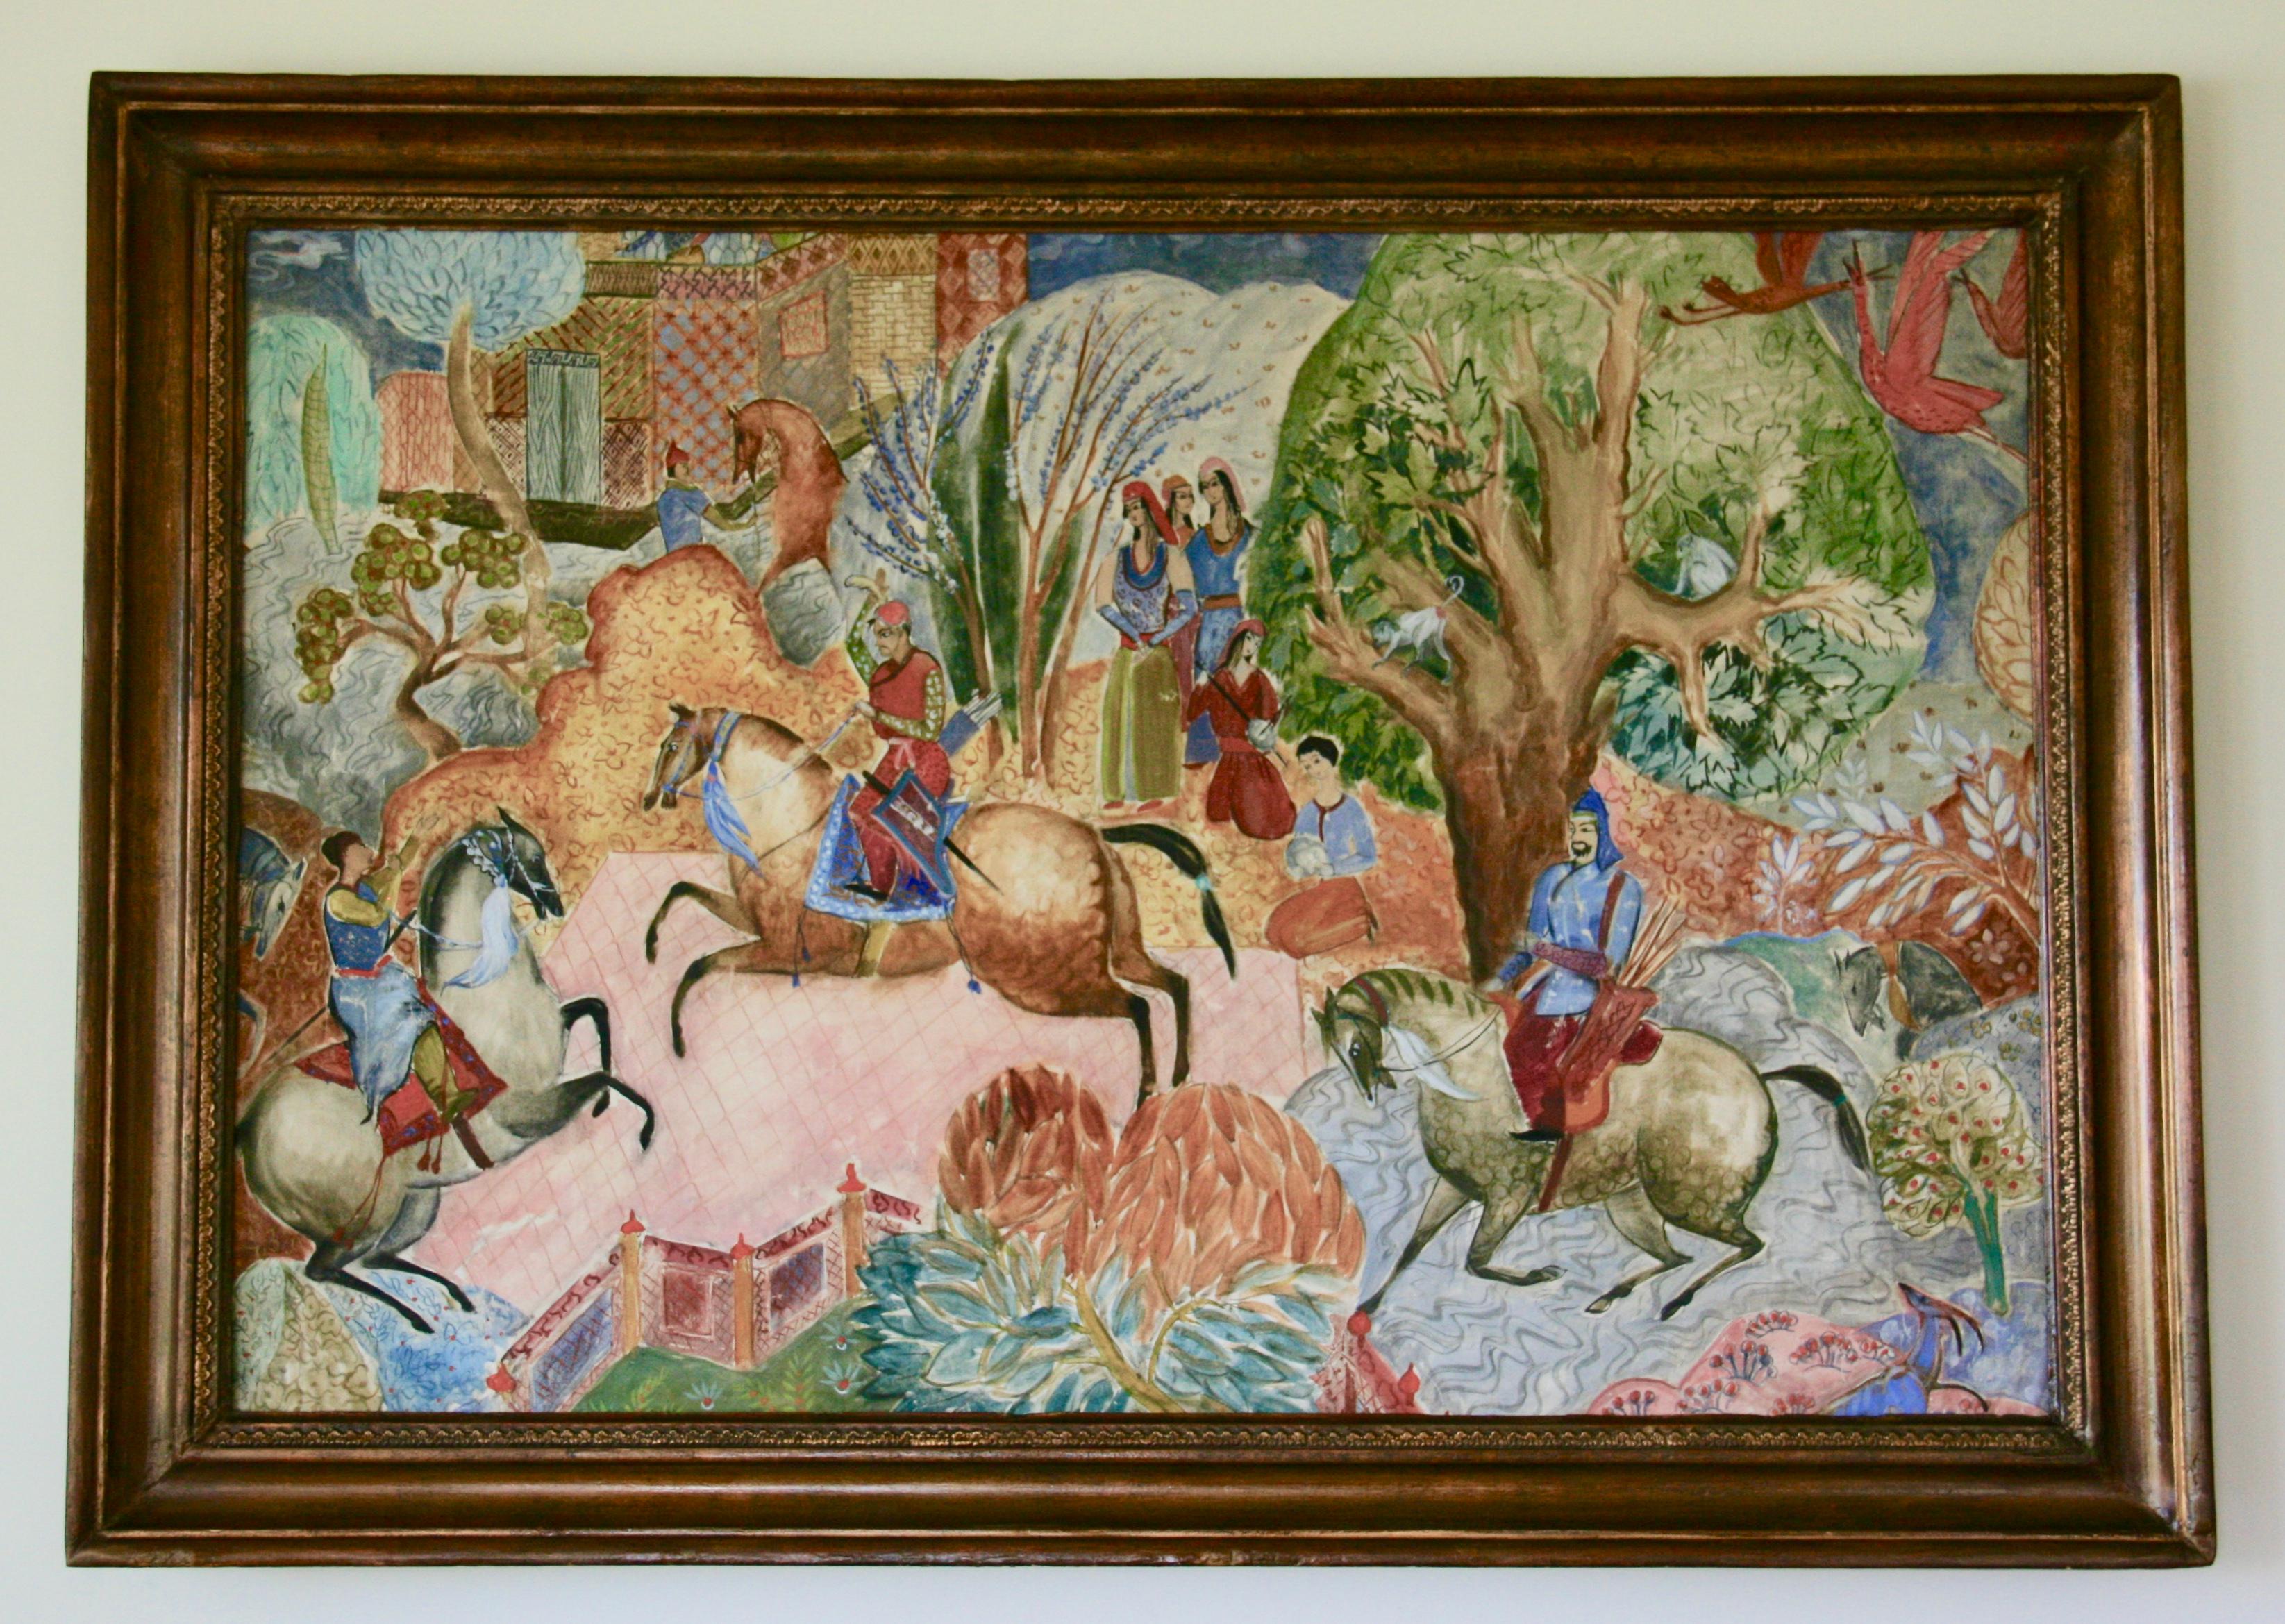 Large Scale Persian Hunt Landscape Painting - Brown Figurative Painting by Unknown